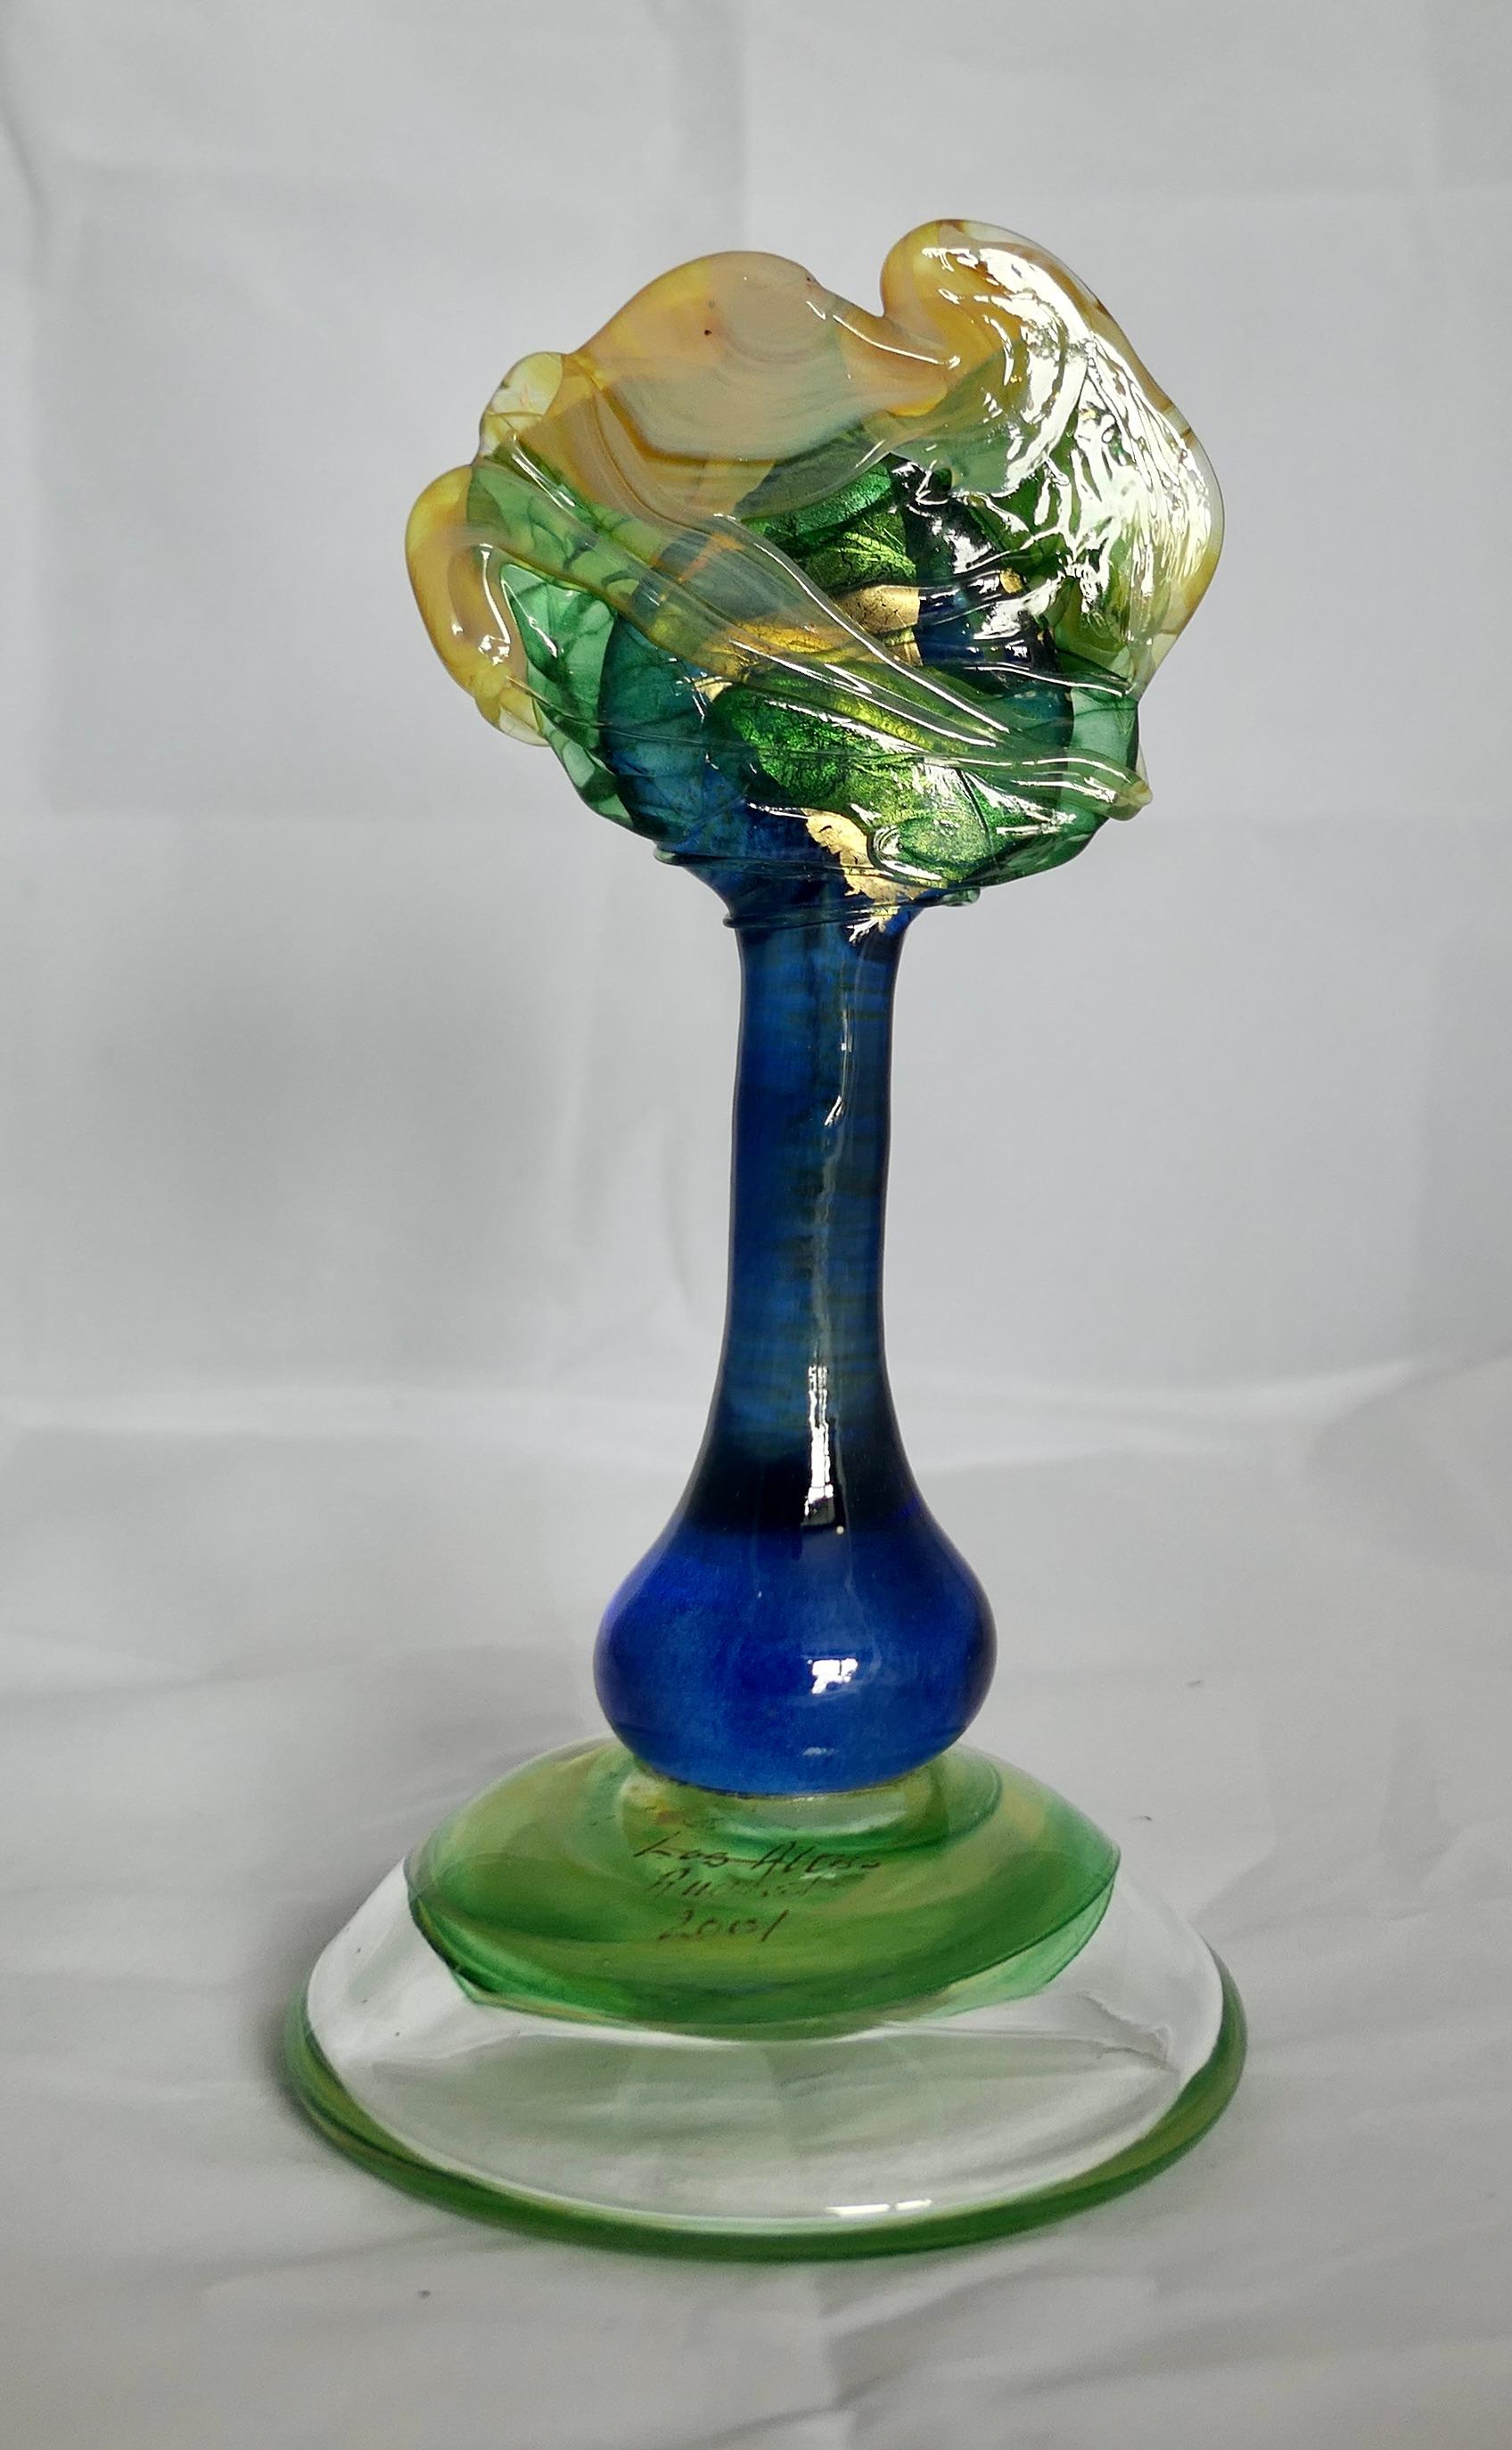 Arts and Crafts Isle of Wight Studio Glass Tree Signé Martin Evans  Superbe pièce   en vente